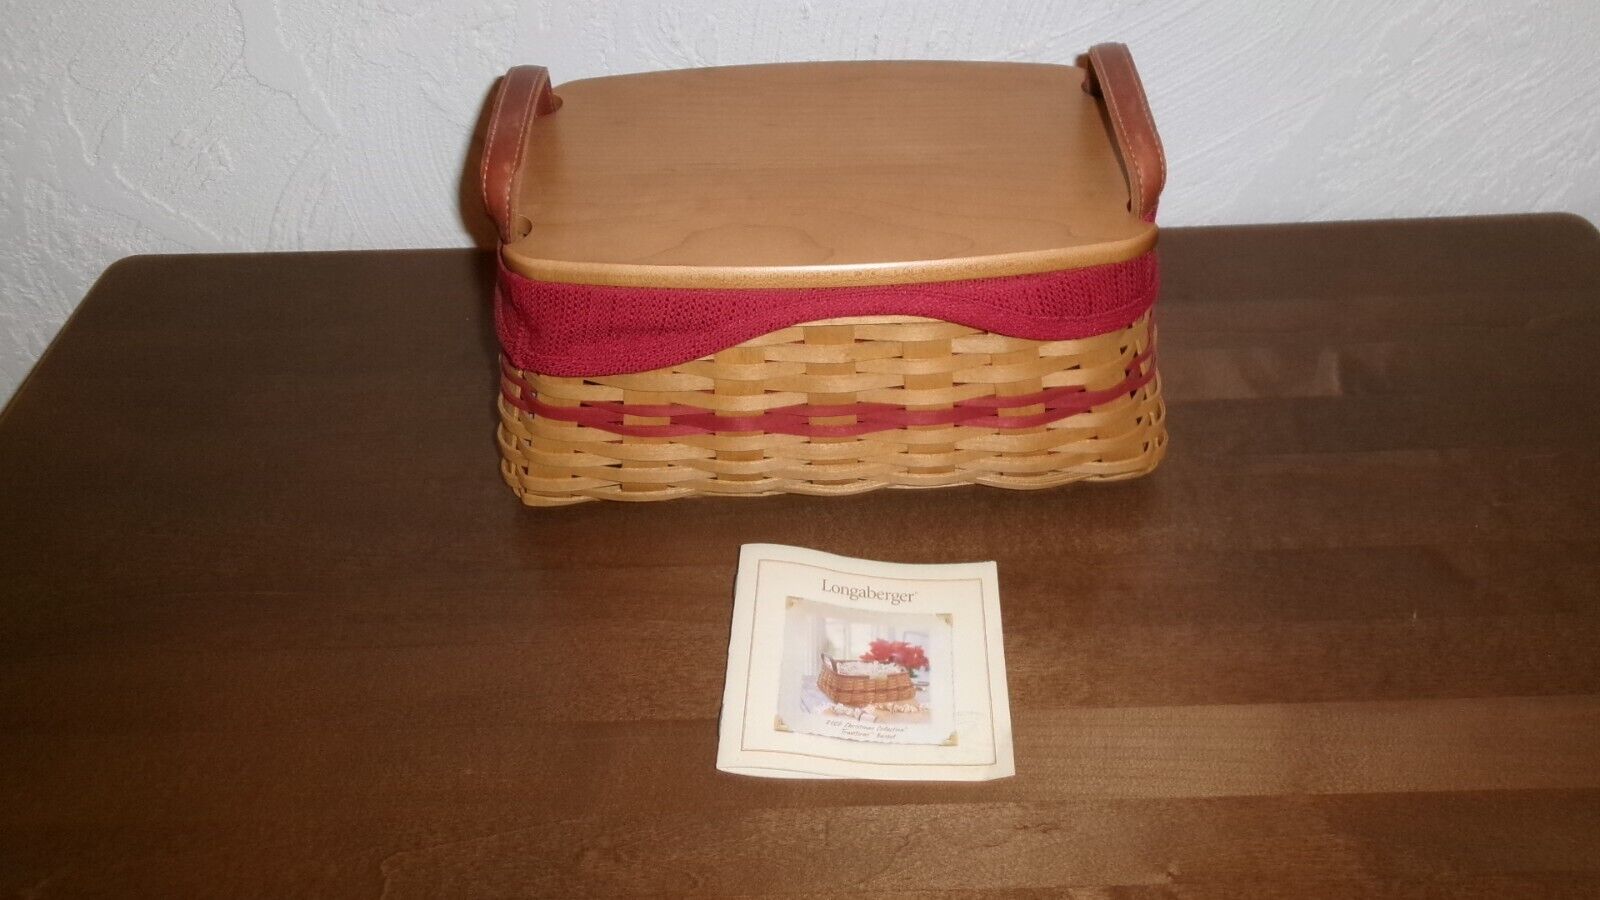 Longaberger Christmas Collection Basket Traditions Dowel Ribbon Woodcrafts Lid